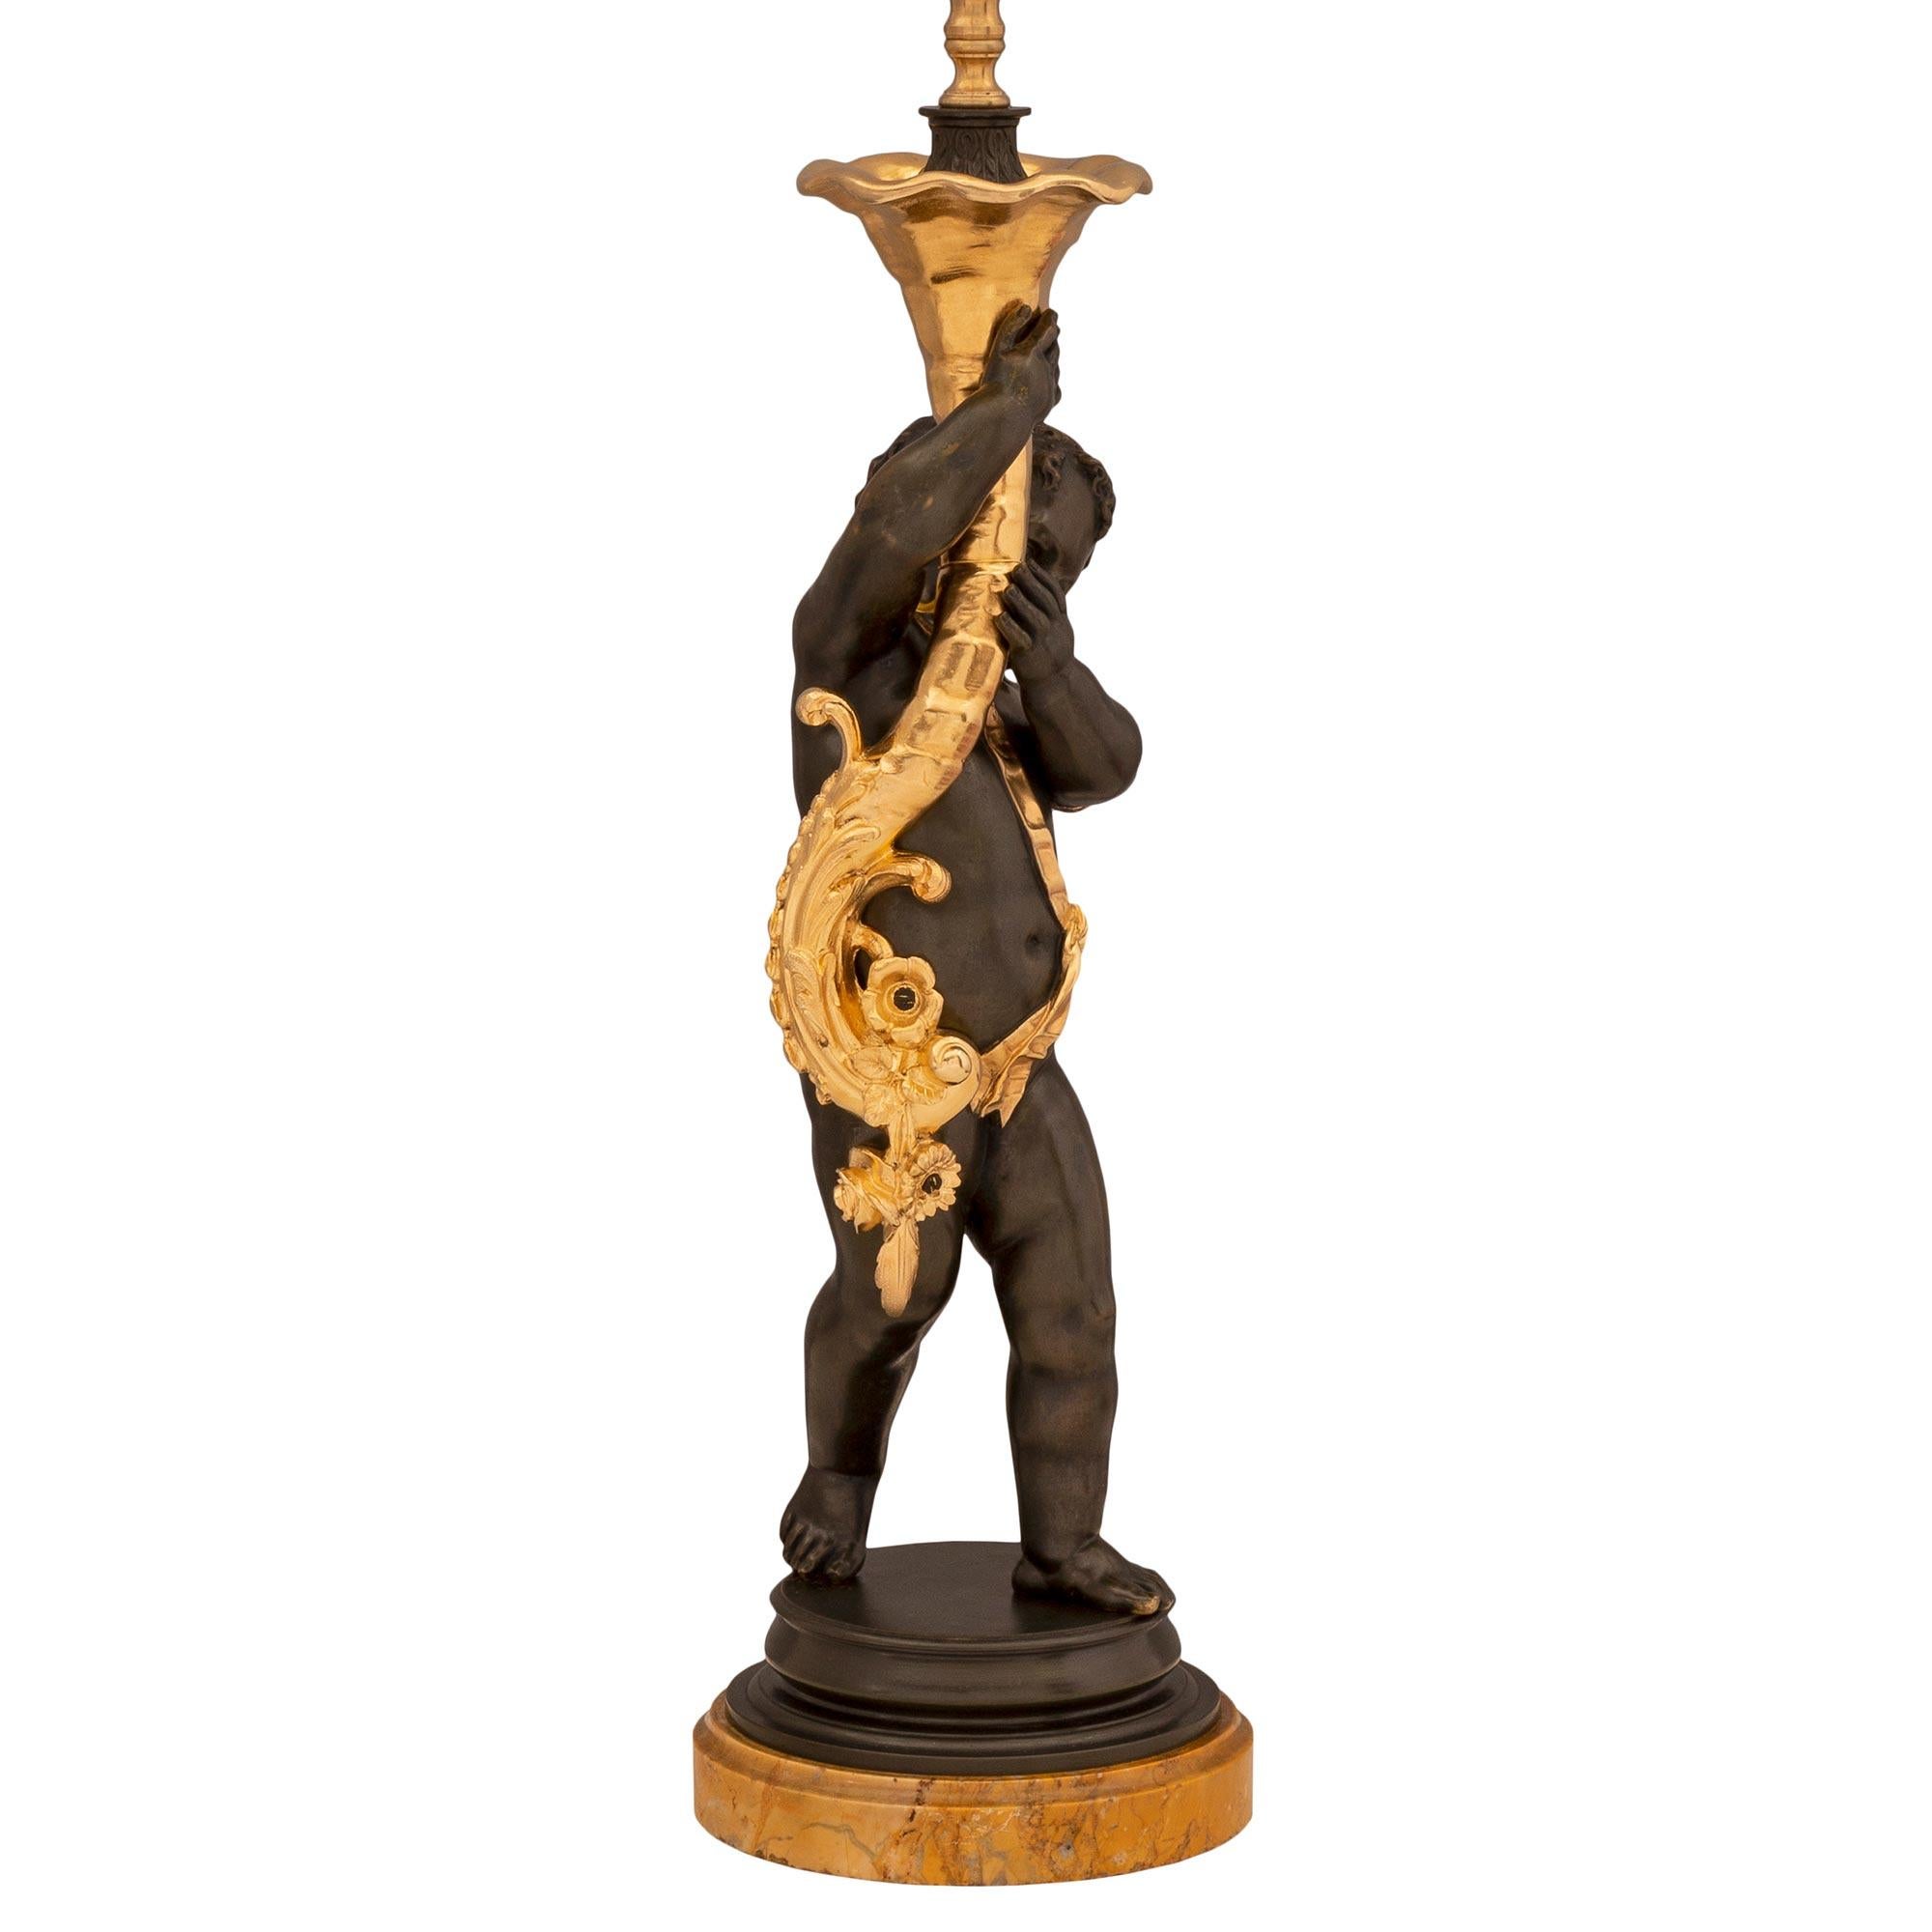 A charming and very high quality French 19th century Louis XVI st. Belle Époque period patinated bronze, ormolu and Sienna marble lamp. The charming lamp is raised by a fine circular Sienna marble base with a lovely mottled border. The charming